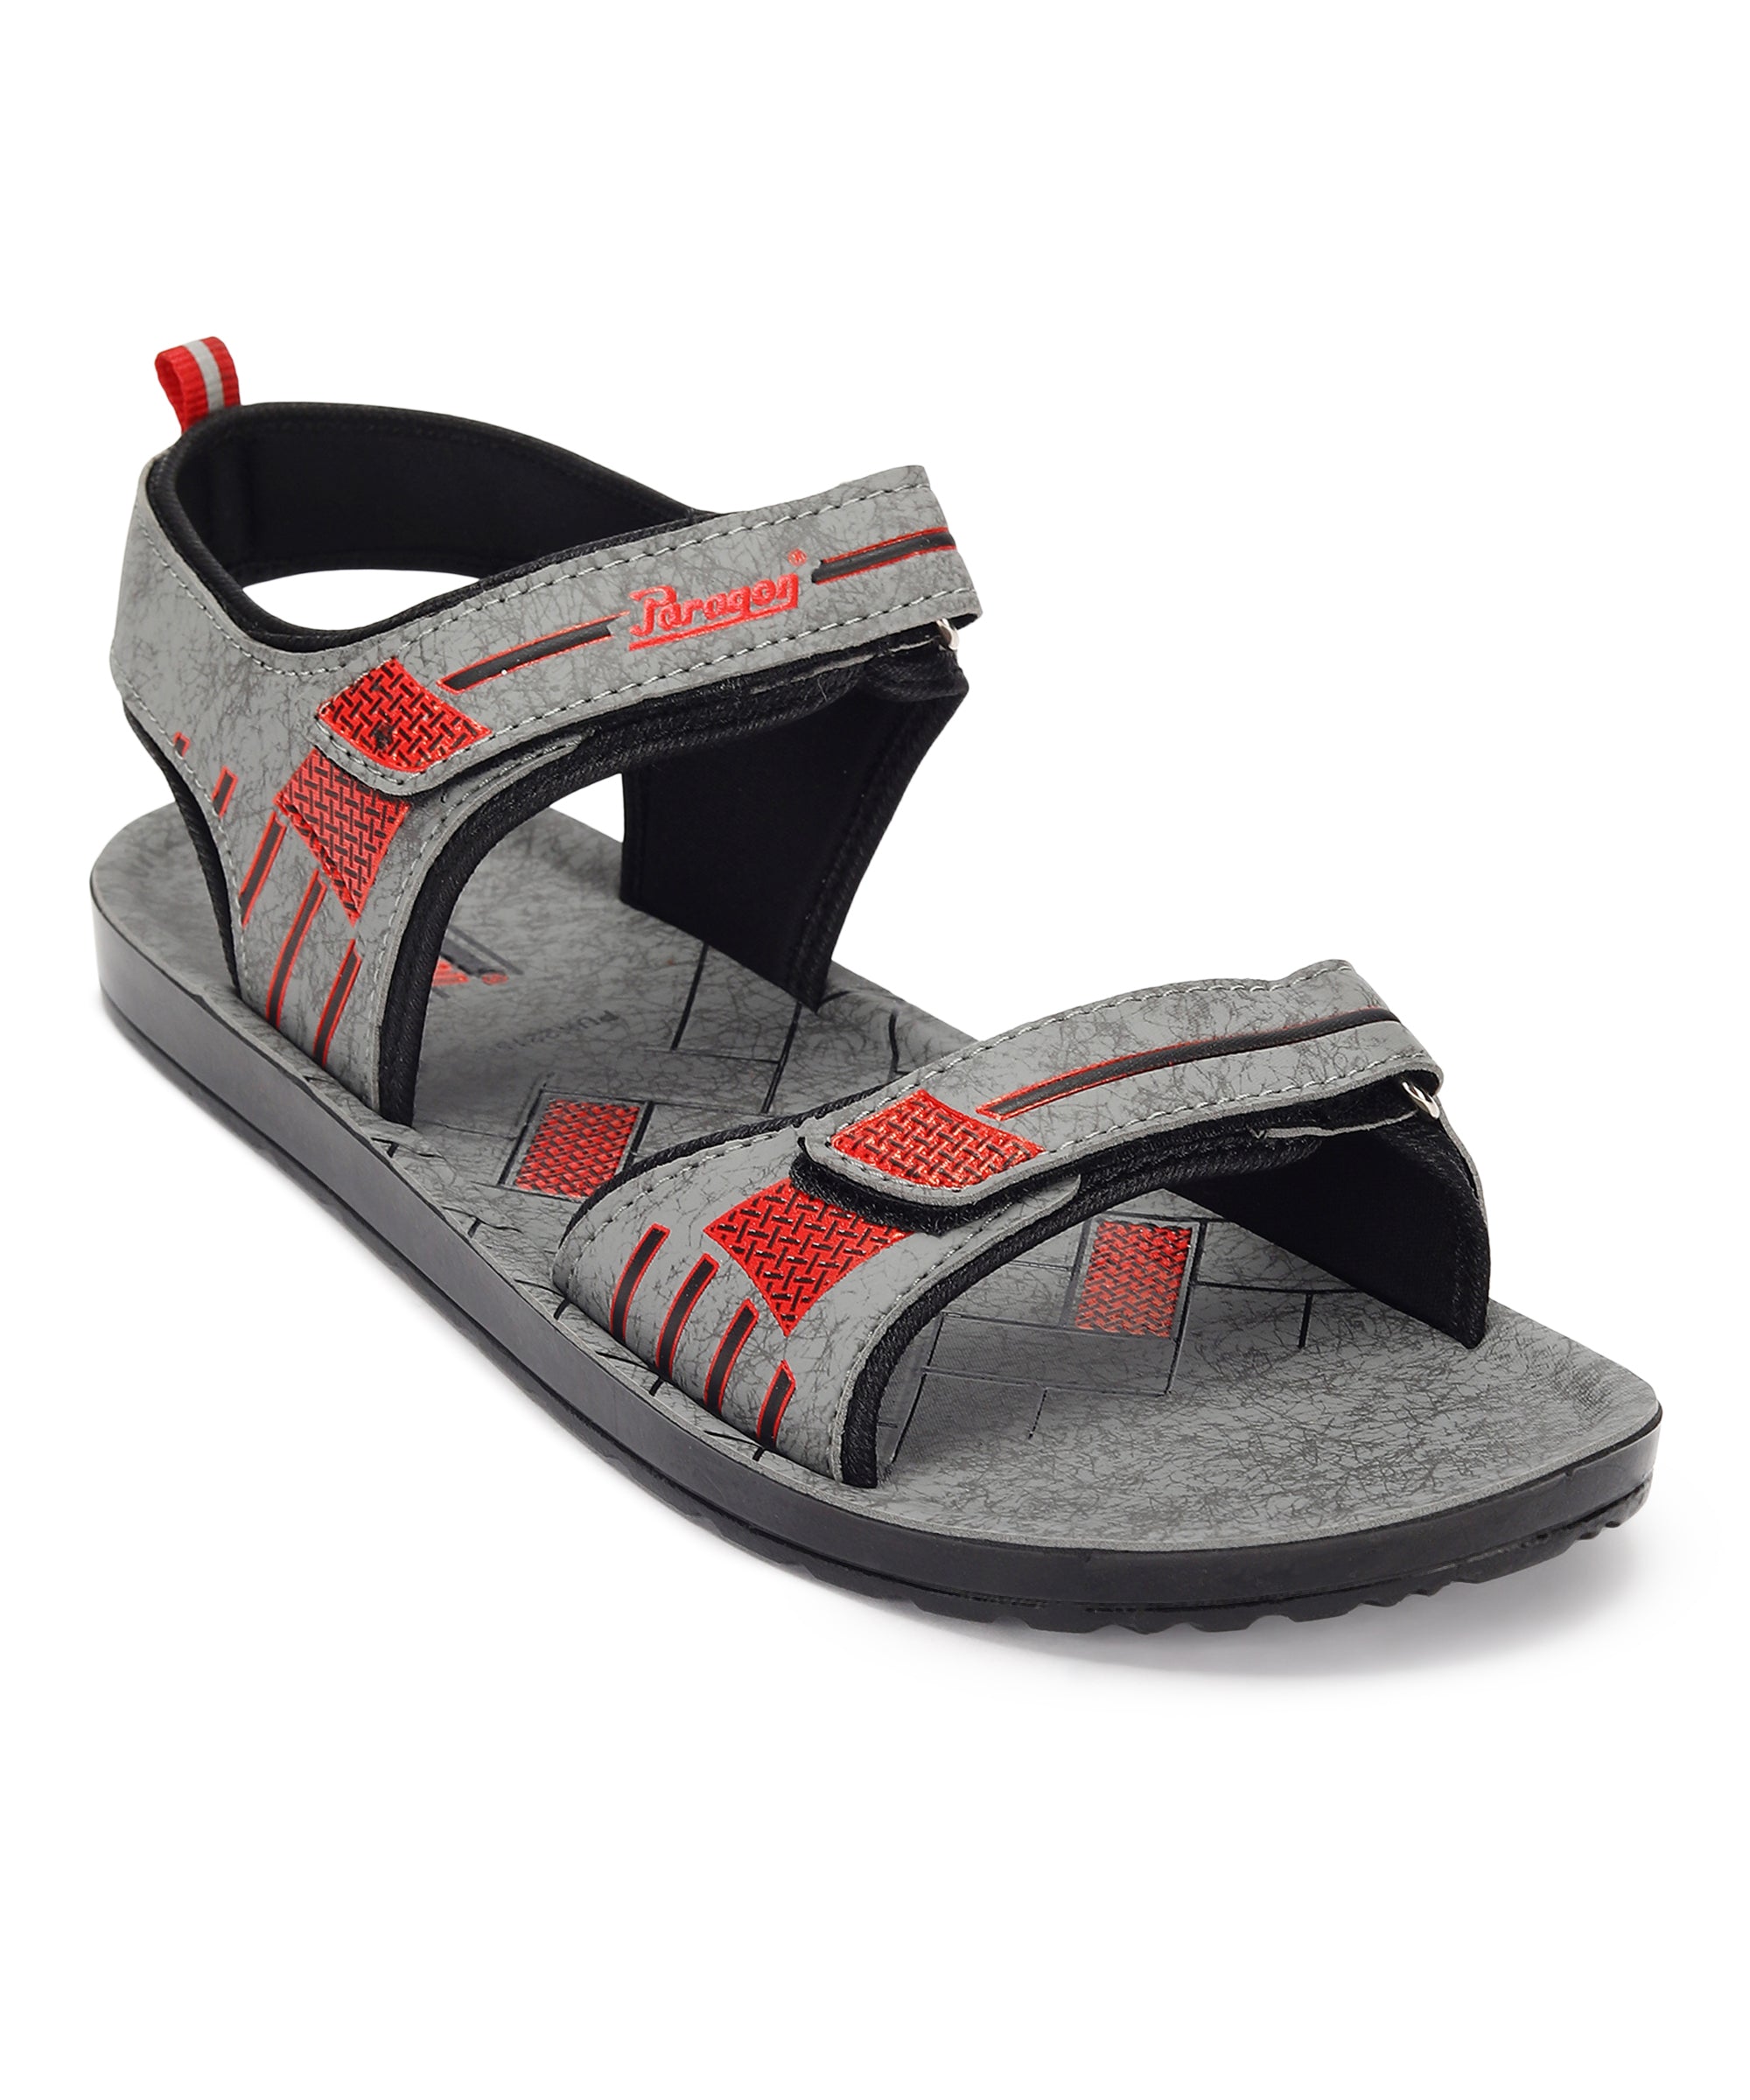 Paragon PUK2215G Men Stylish Sandals | Comfortable Sandals for Daily Outdoor Use | Casual Formal Sandals with Cushioned Soles